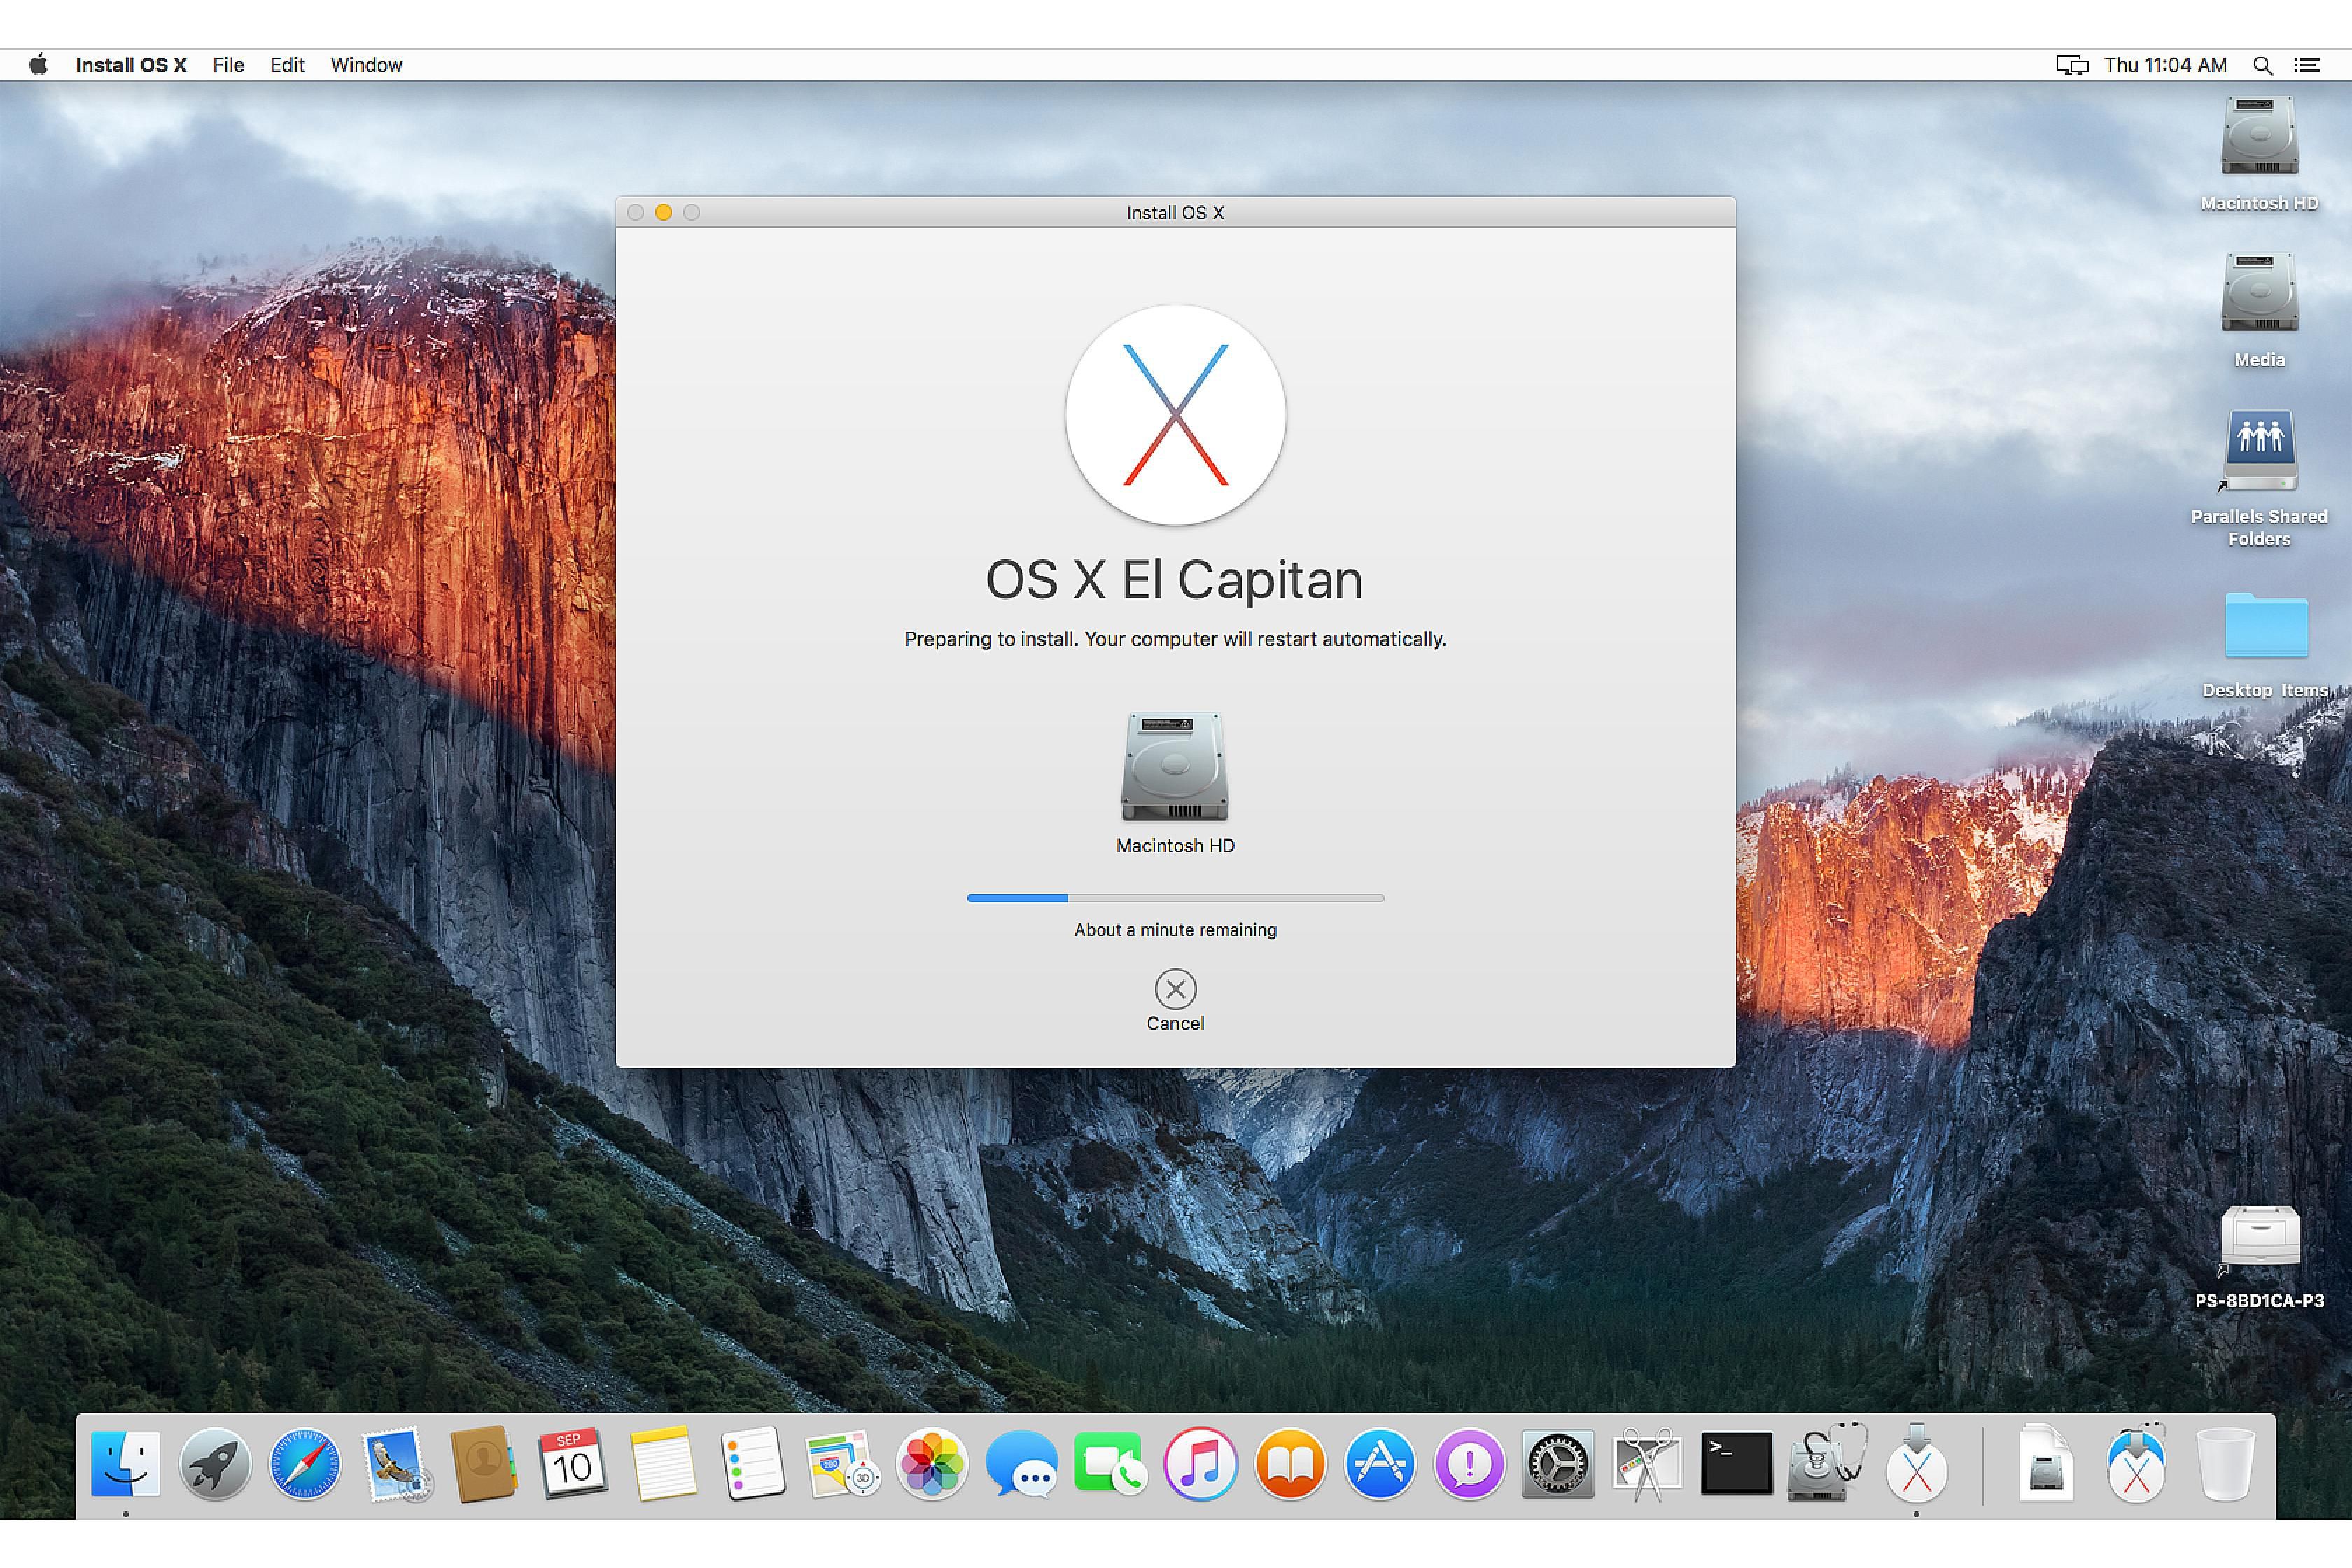 What Is File Format For Os X El Capitan